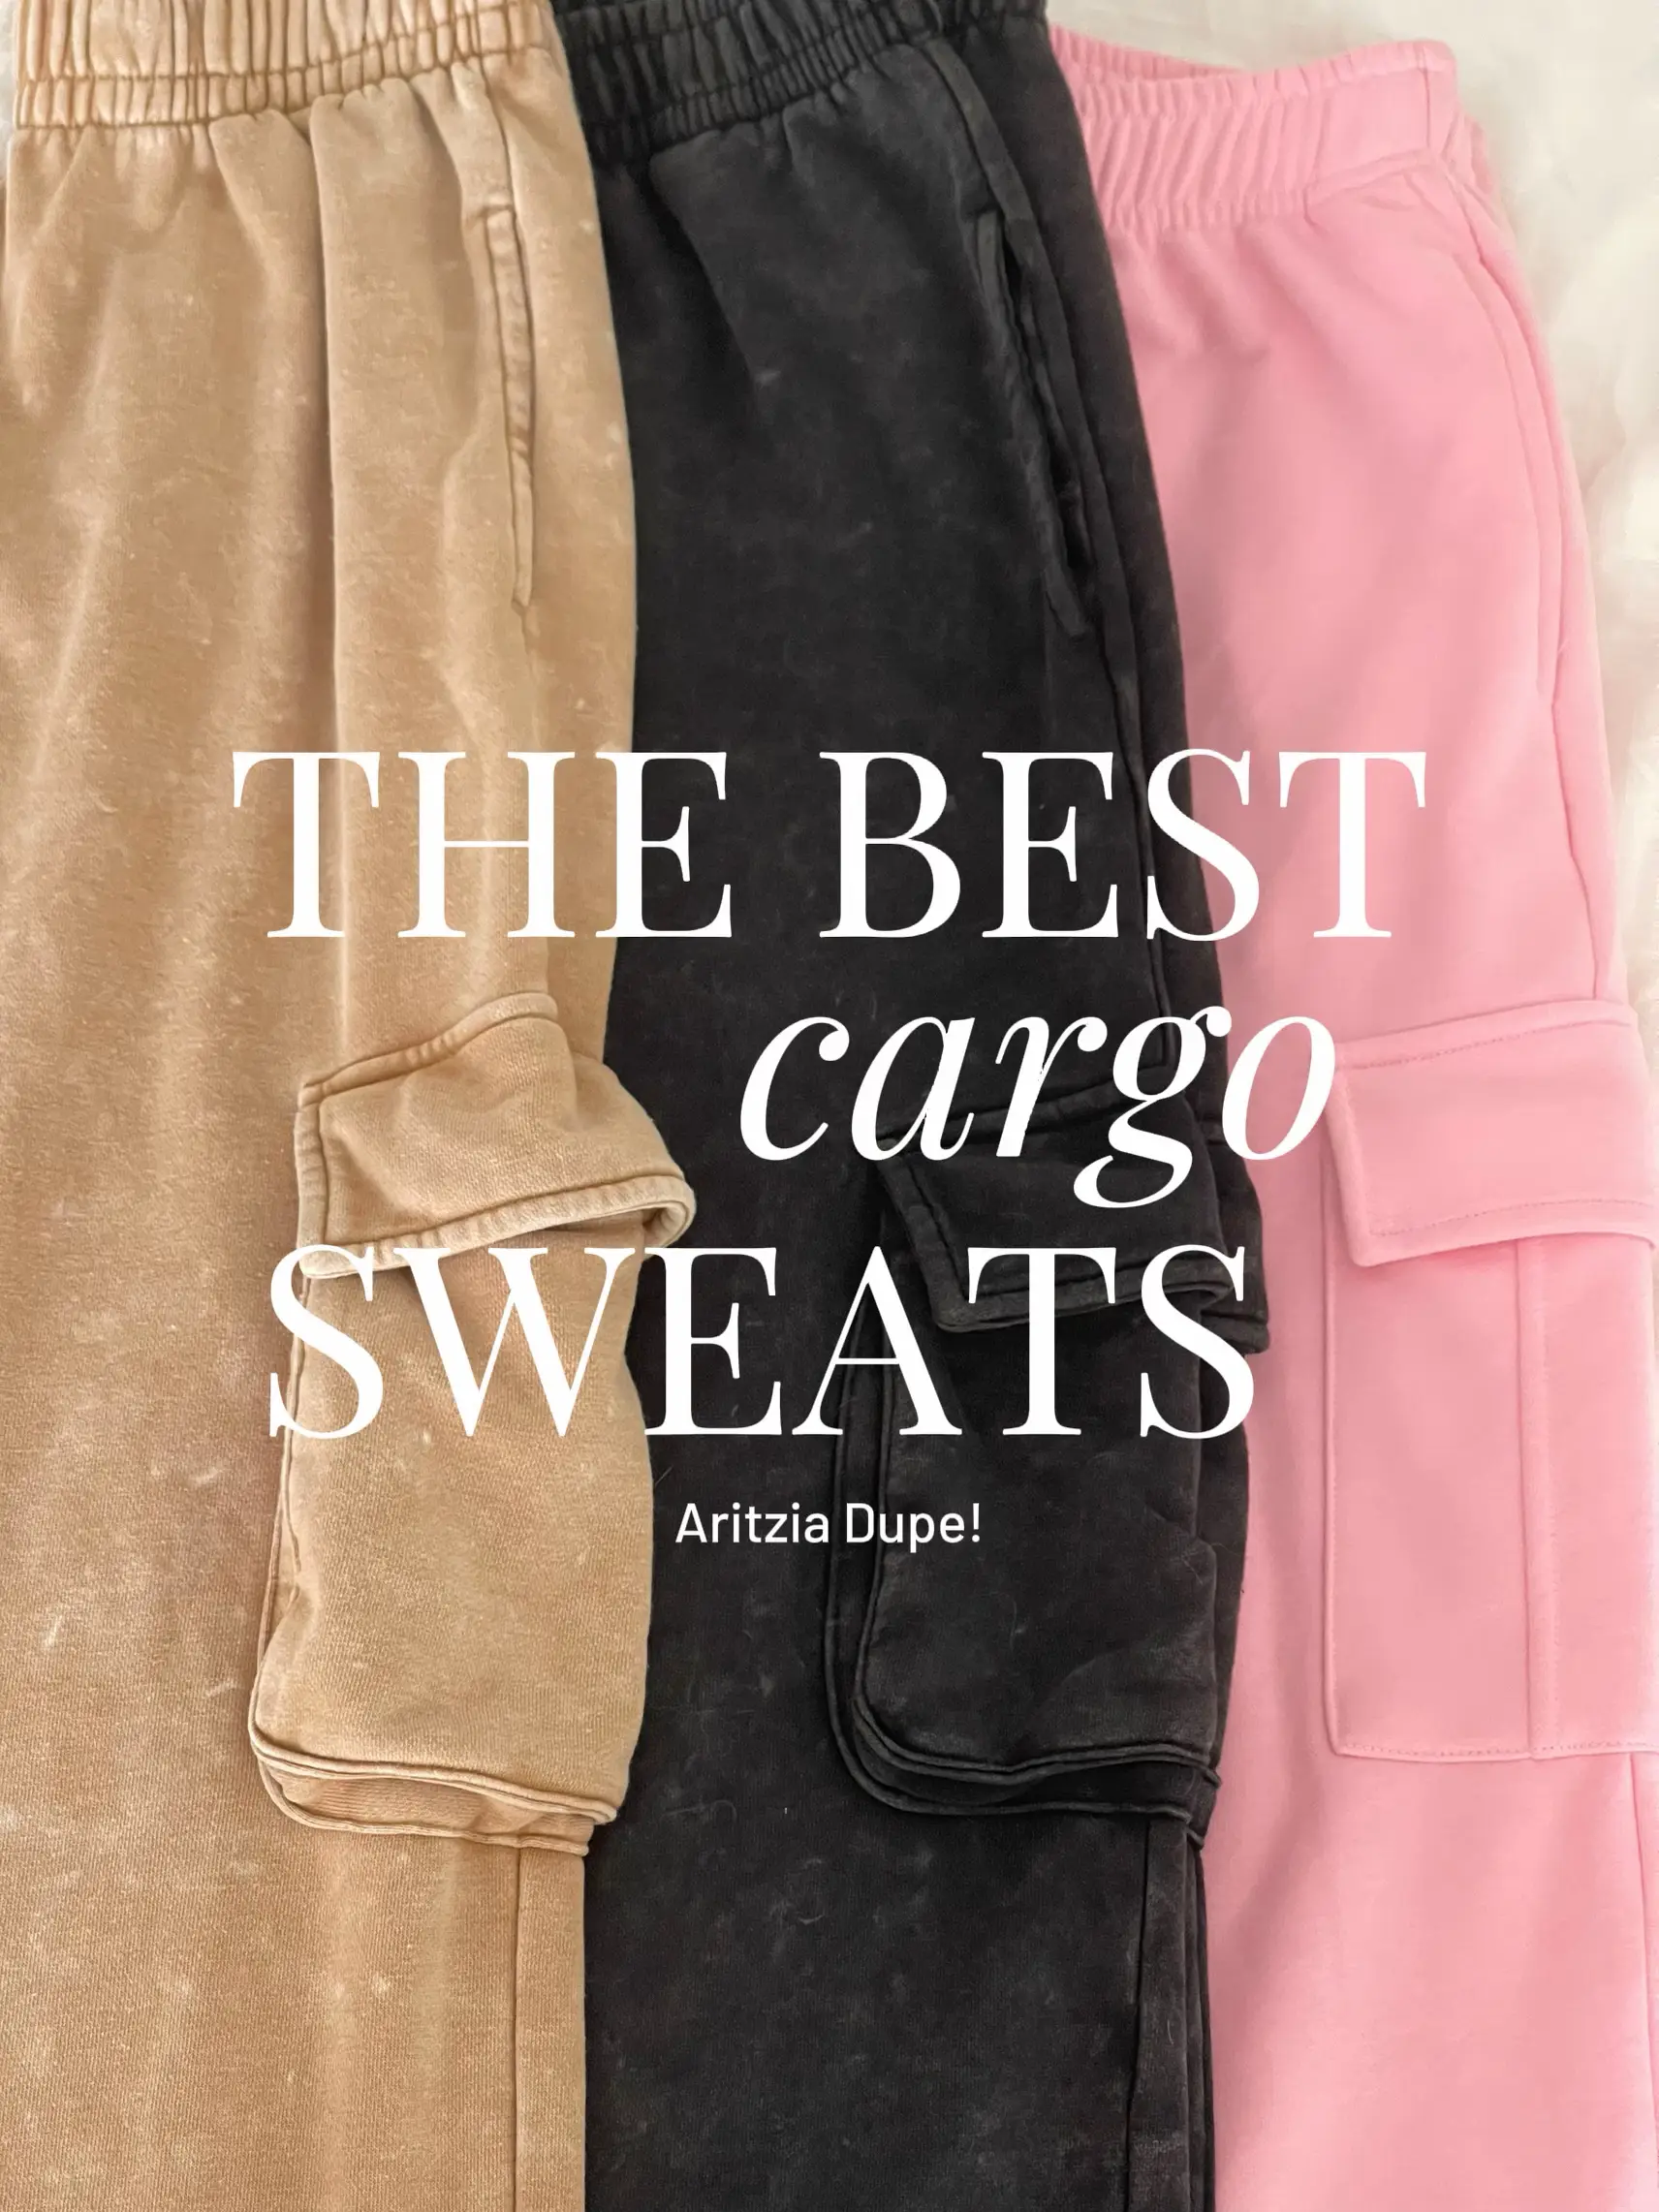 I found a dupe of the viral butt-boosting Aritzia cargo sweats for